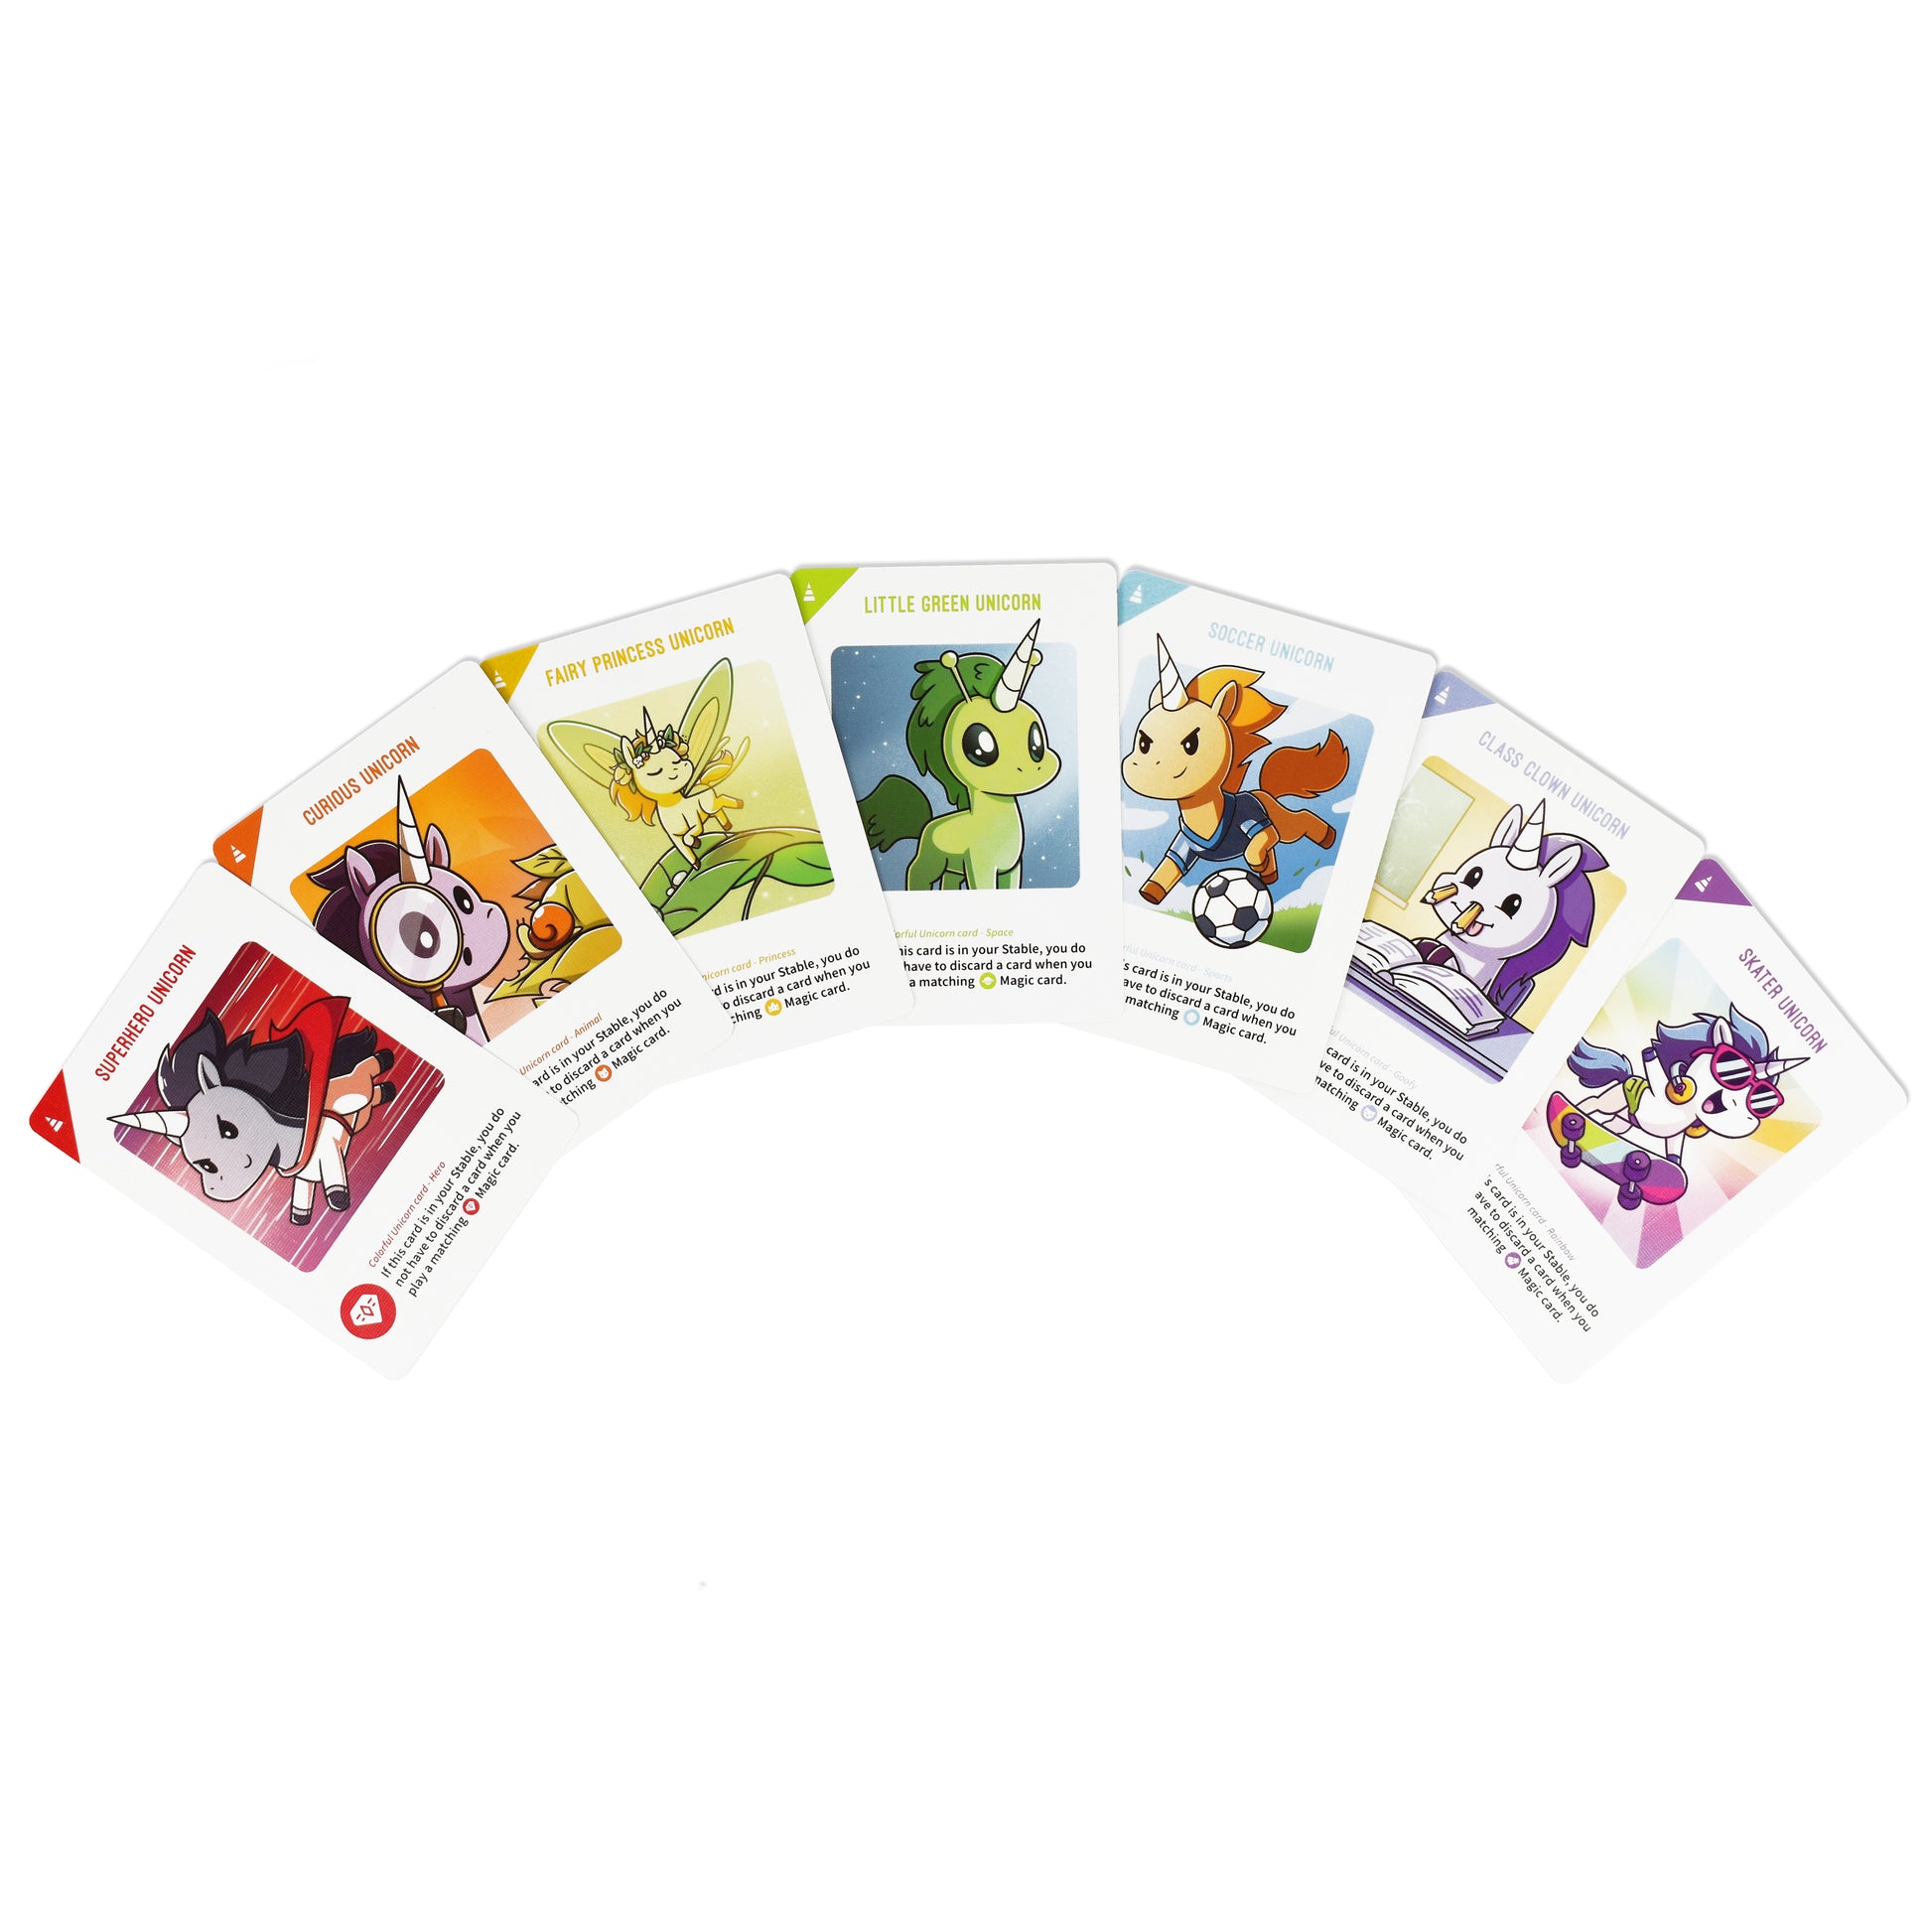 A fan of seven Unstable Unicorns for Kids: Base Game playing cards featuring various cartoon animals, including unicorns, depicted as superheroes, spread out on a white background by Unstable Games.